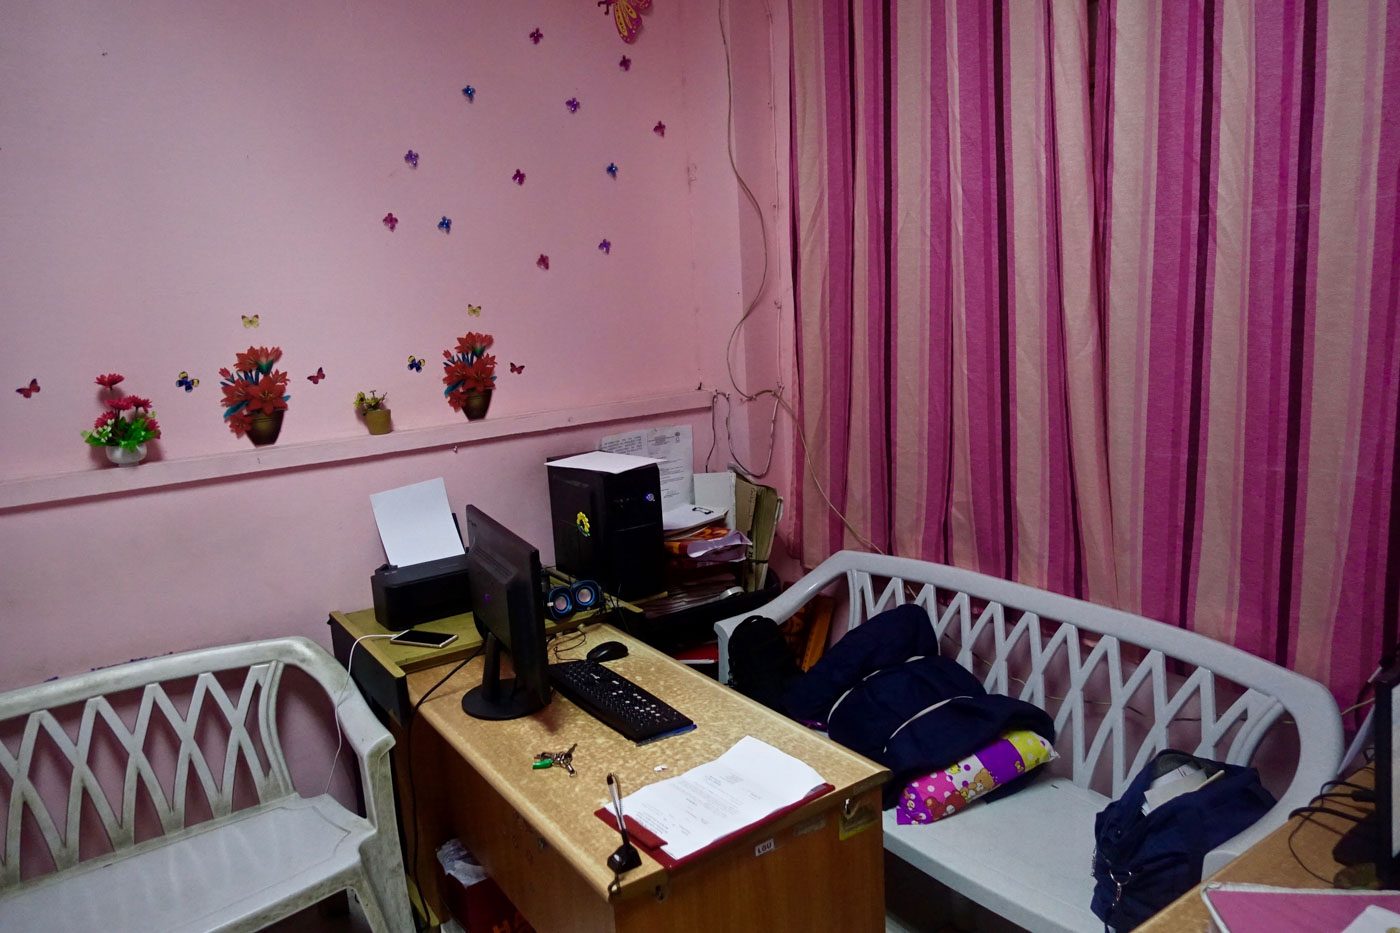 BENCHES FOR SLEEPING. The Batasan police station's pink room. Photo by Rambo Talabong/Rappler 